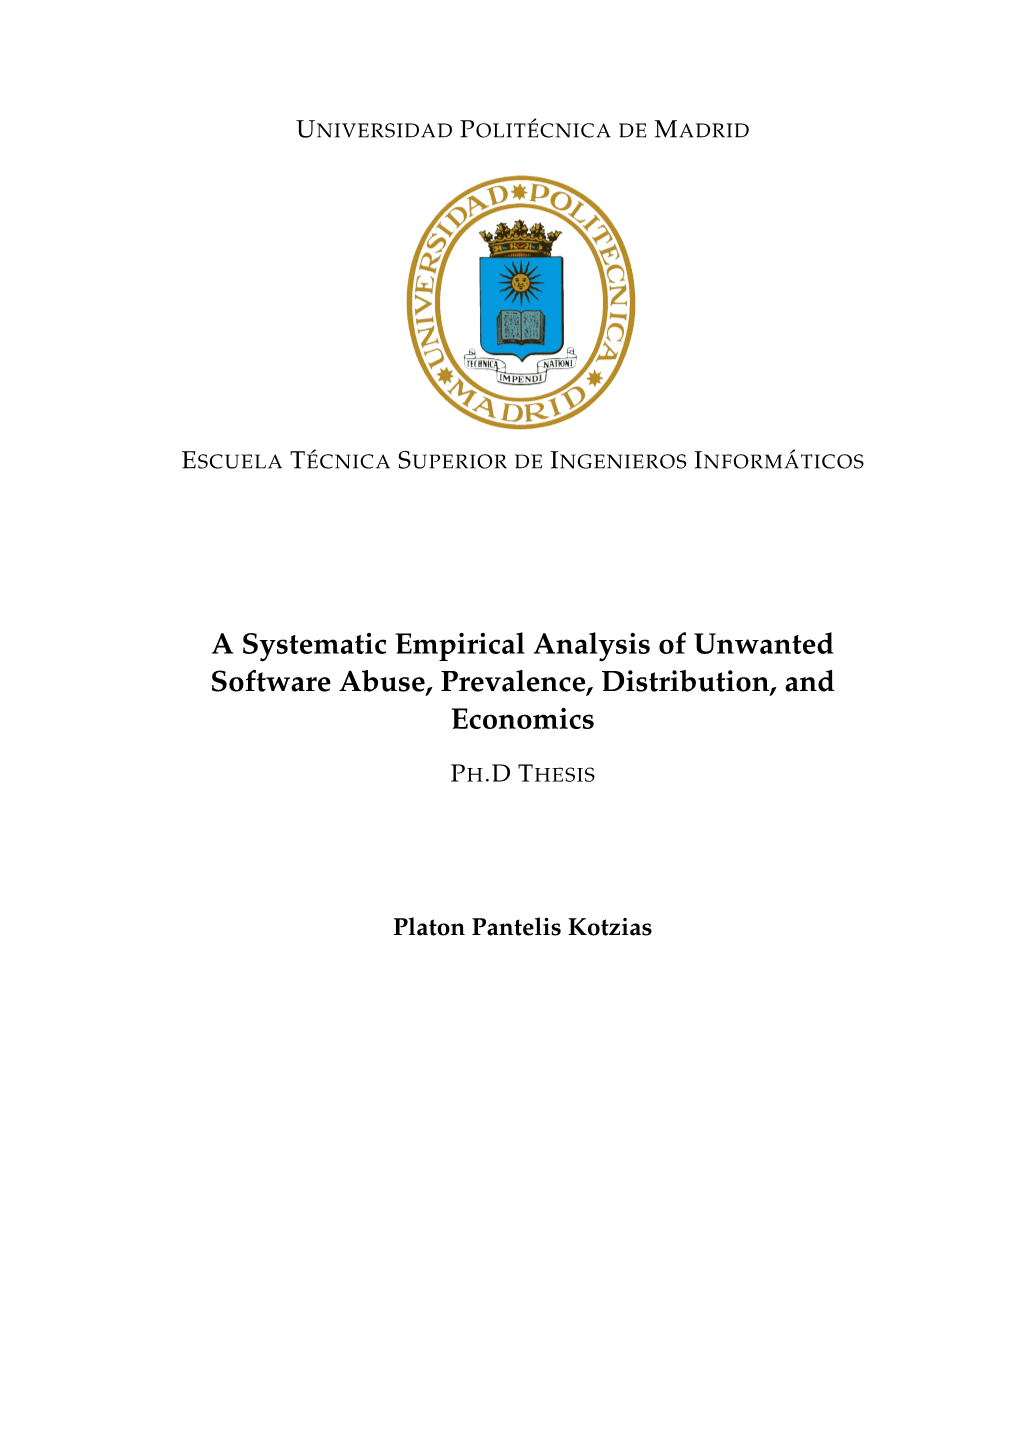 A Systematic Empirical Analysis of Unwanted Software Abuse, Prevalence, Distribution, and Economics